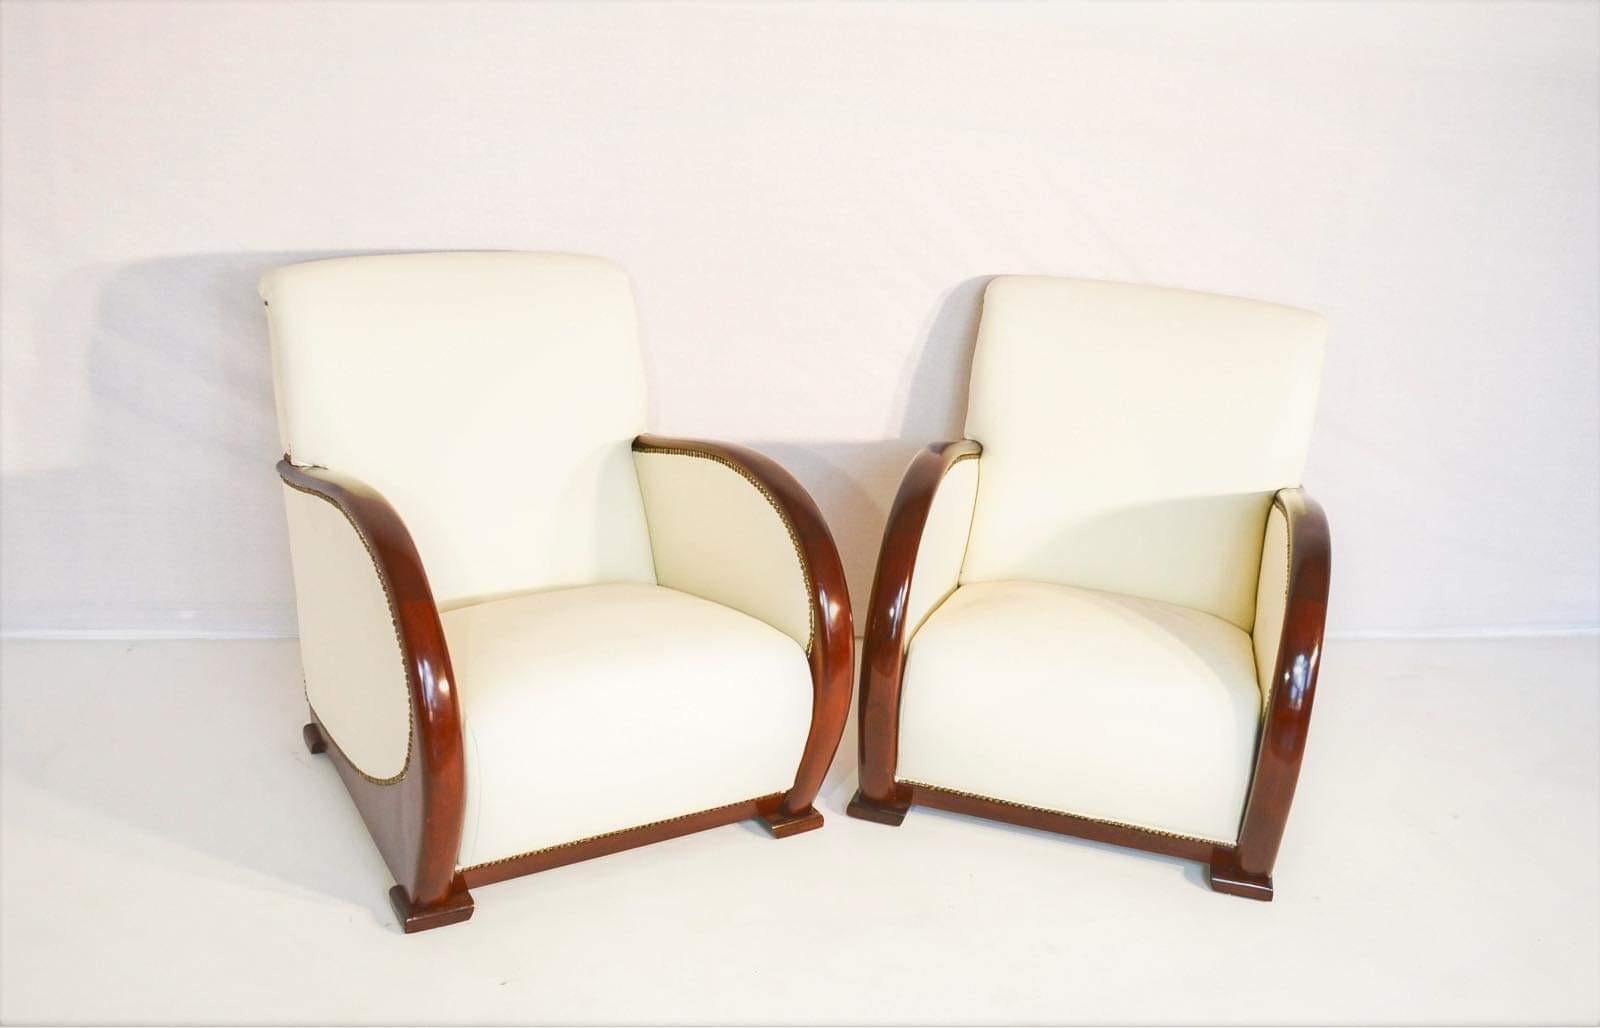 Art Deco Sofa with Lounge Chairs, 1920, France For Sale 4